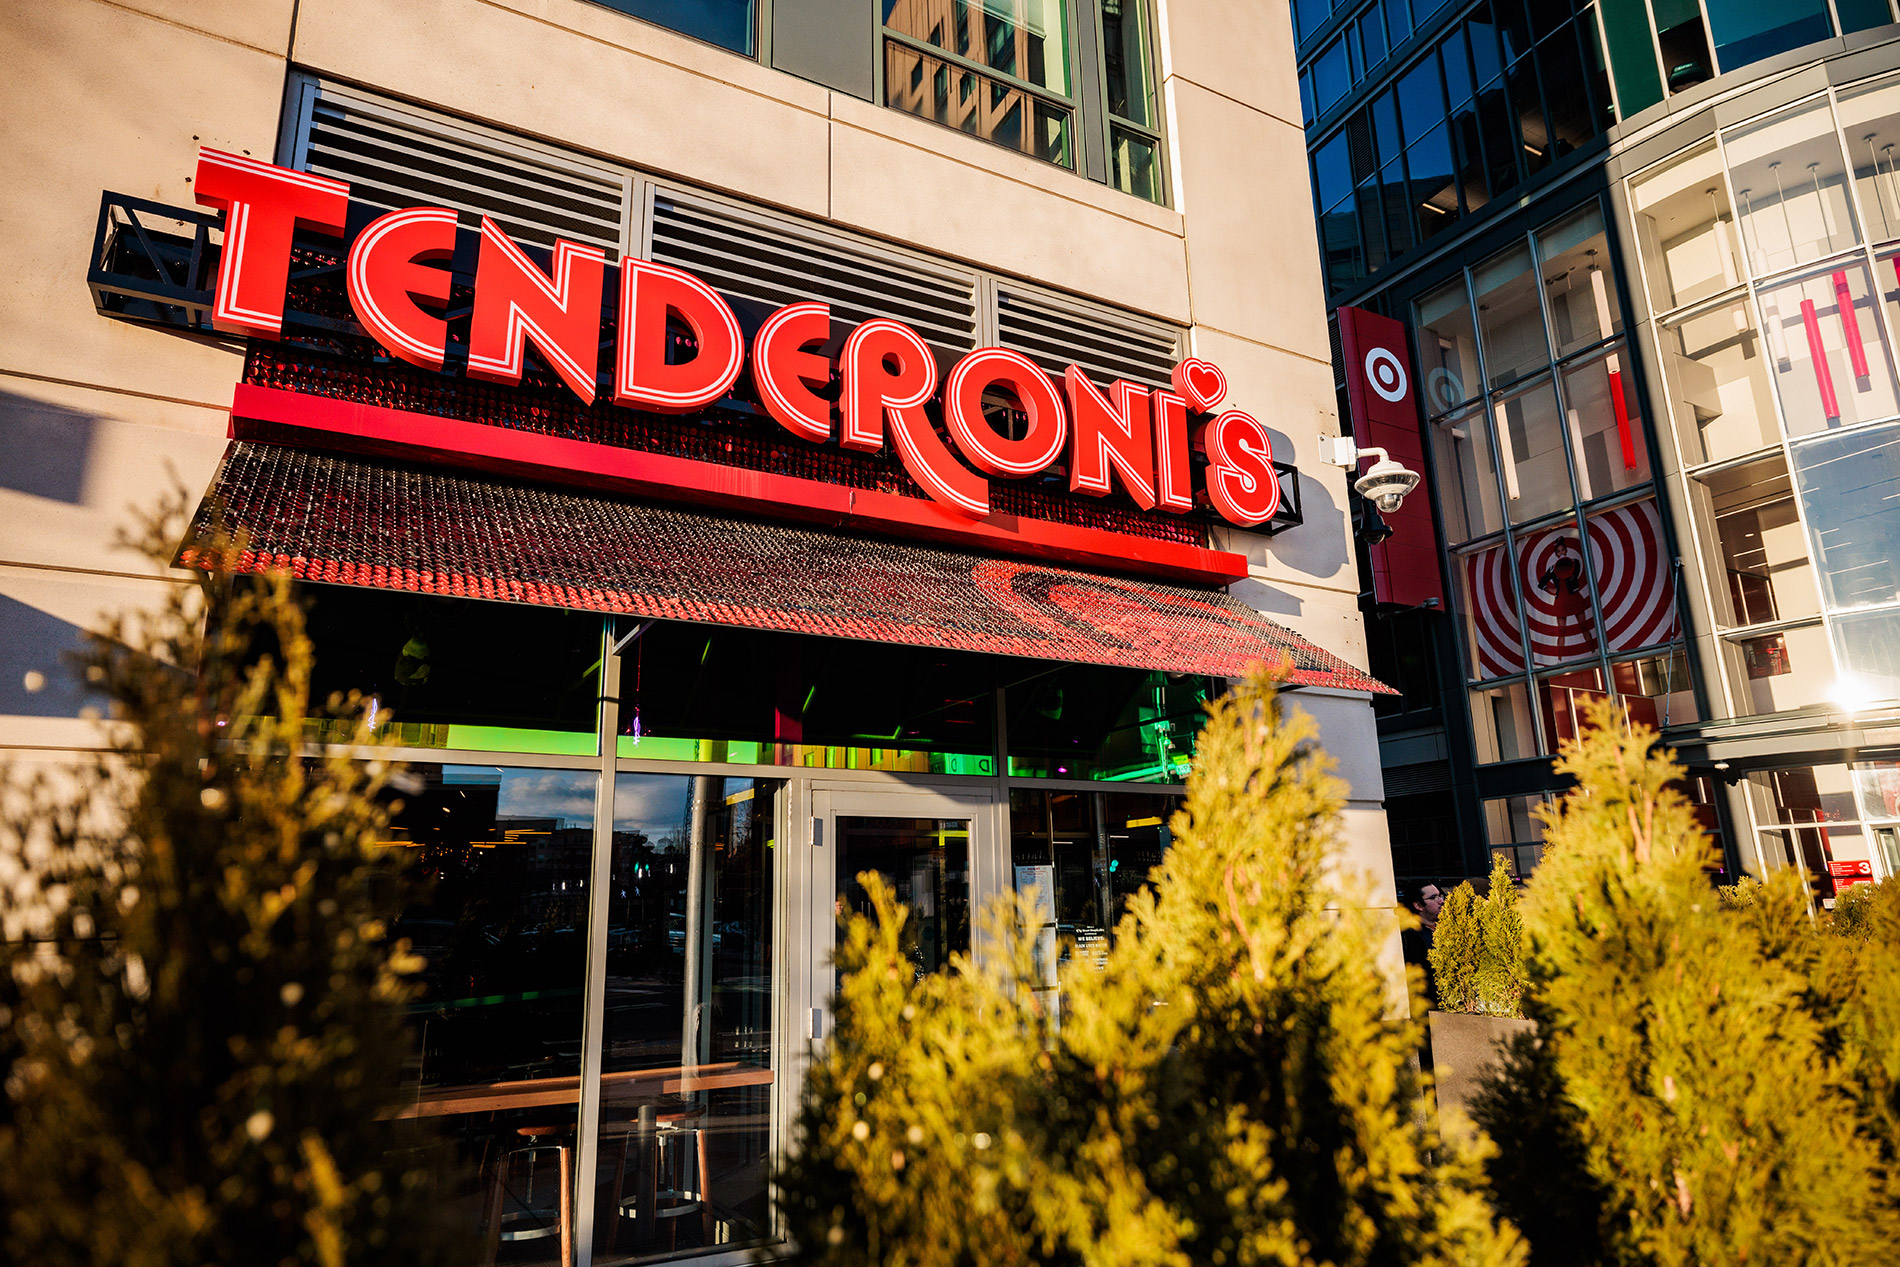 An exterior view of a restaurant with a sign that says tenderoni's.